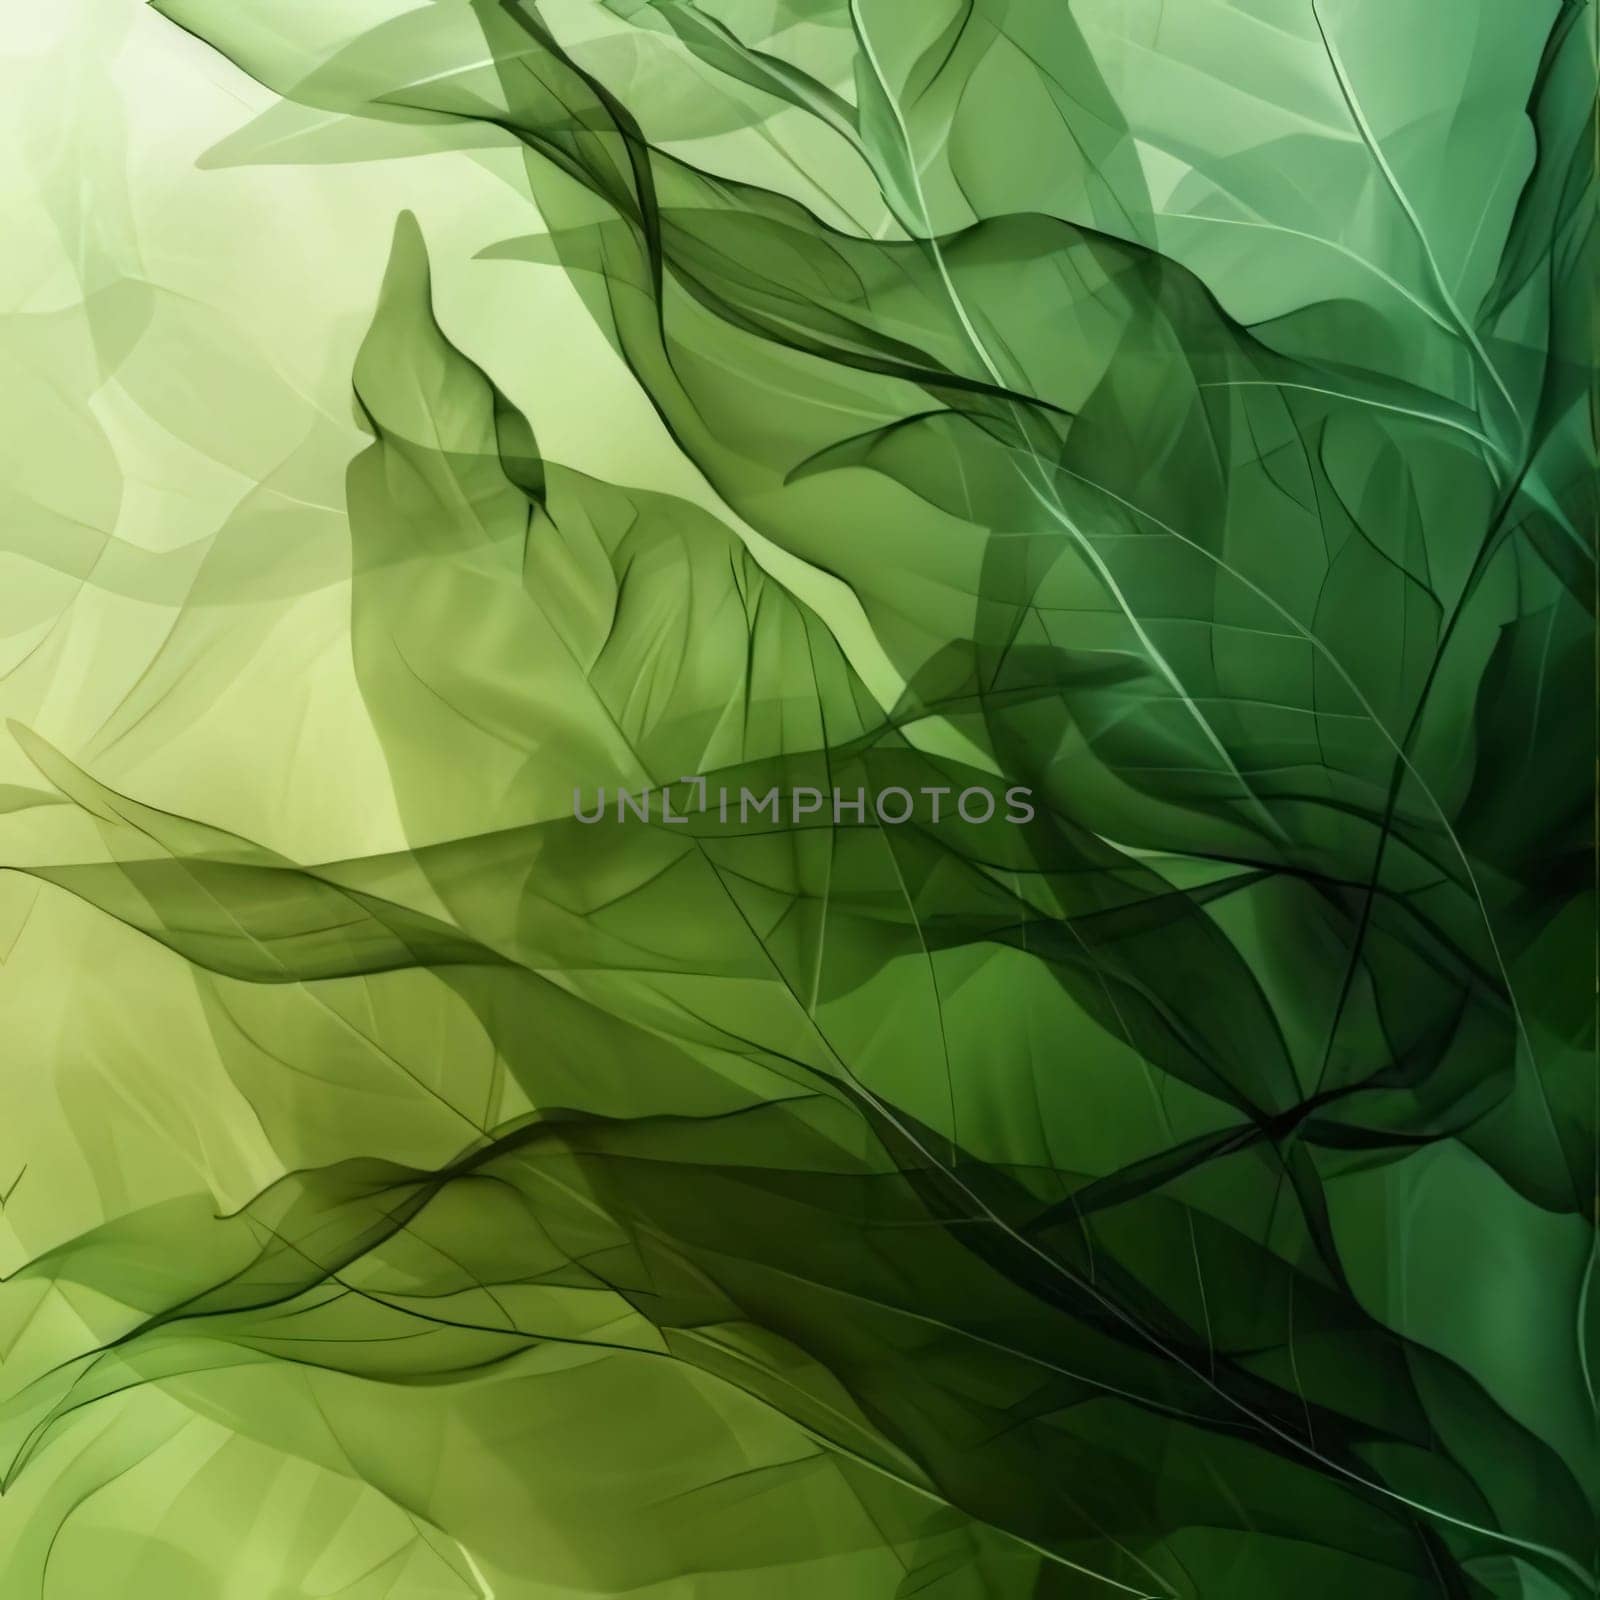 Abstract background design: Abstract background with green leaves and space for text, vector illustration.